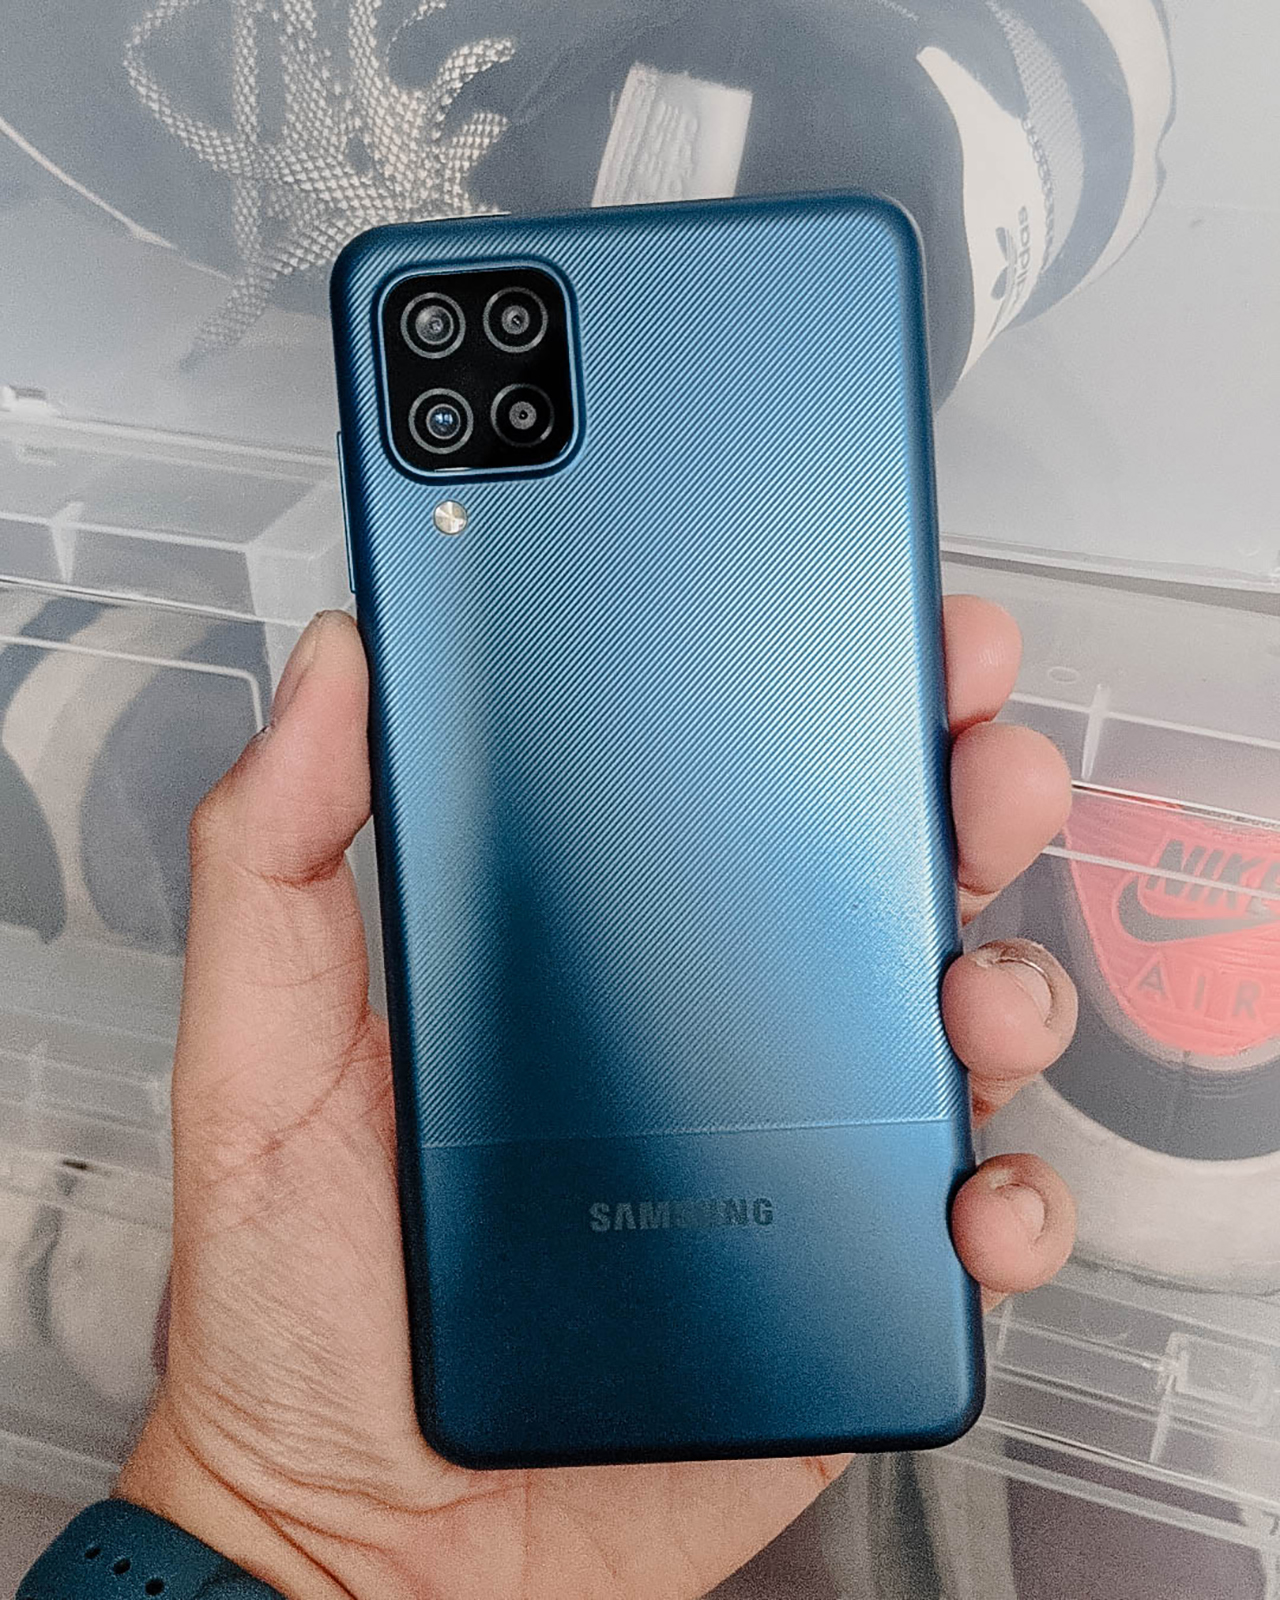 Samsung Galaxy A12 Review: Budget Phone For Content Creators?